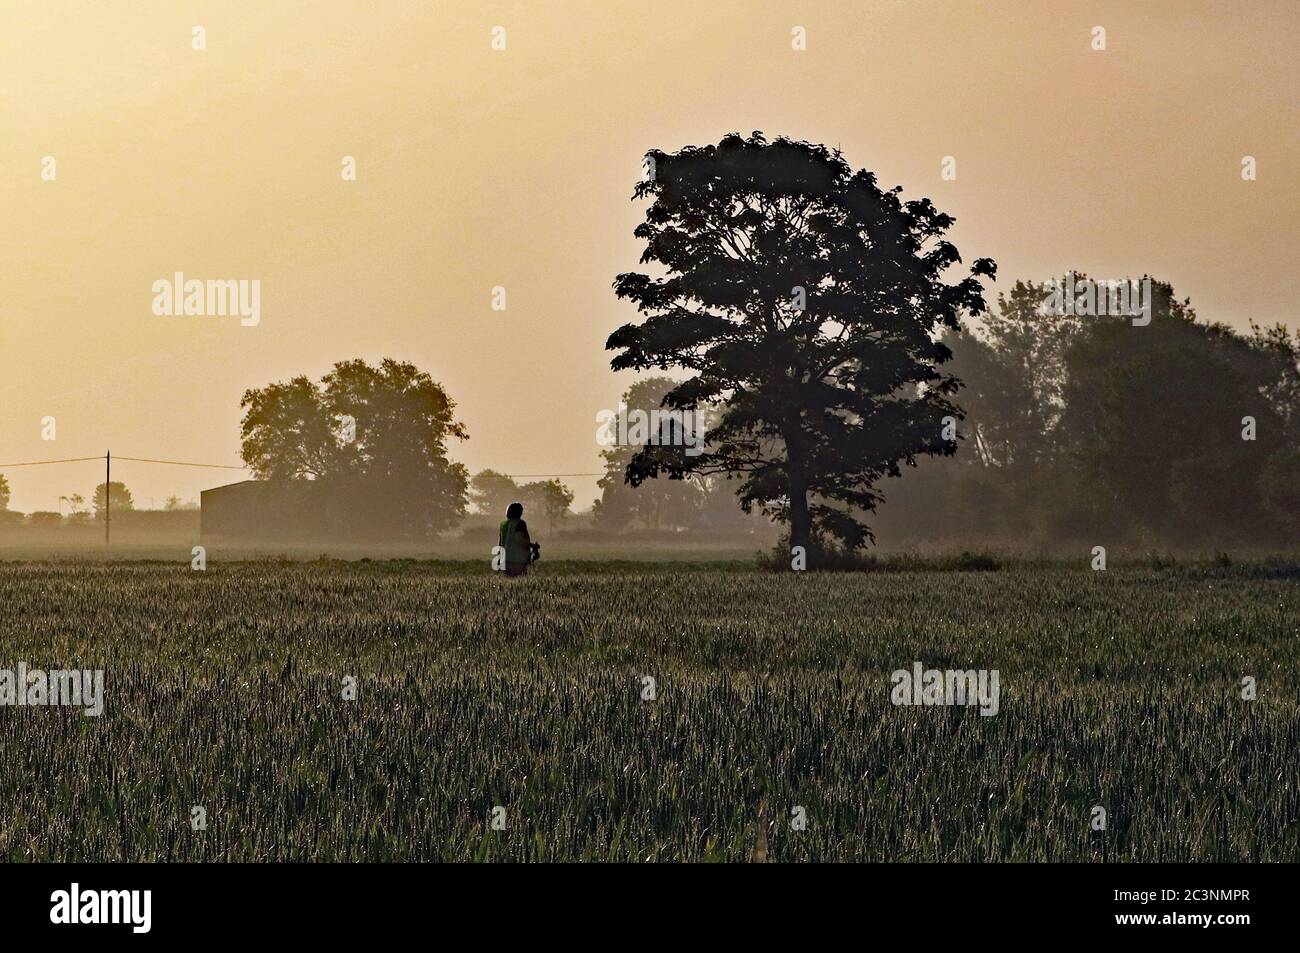 Early morning dog walker on Martin Mere. A lone dog walker crosses a field of wheat not long after dawn on a hazy sunny morning near Burscough. Stock Photo